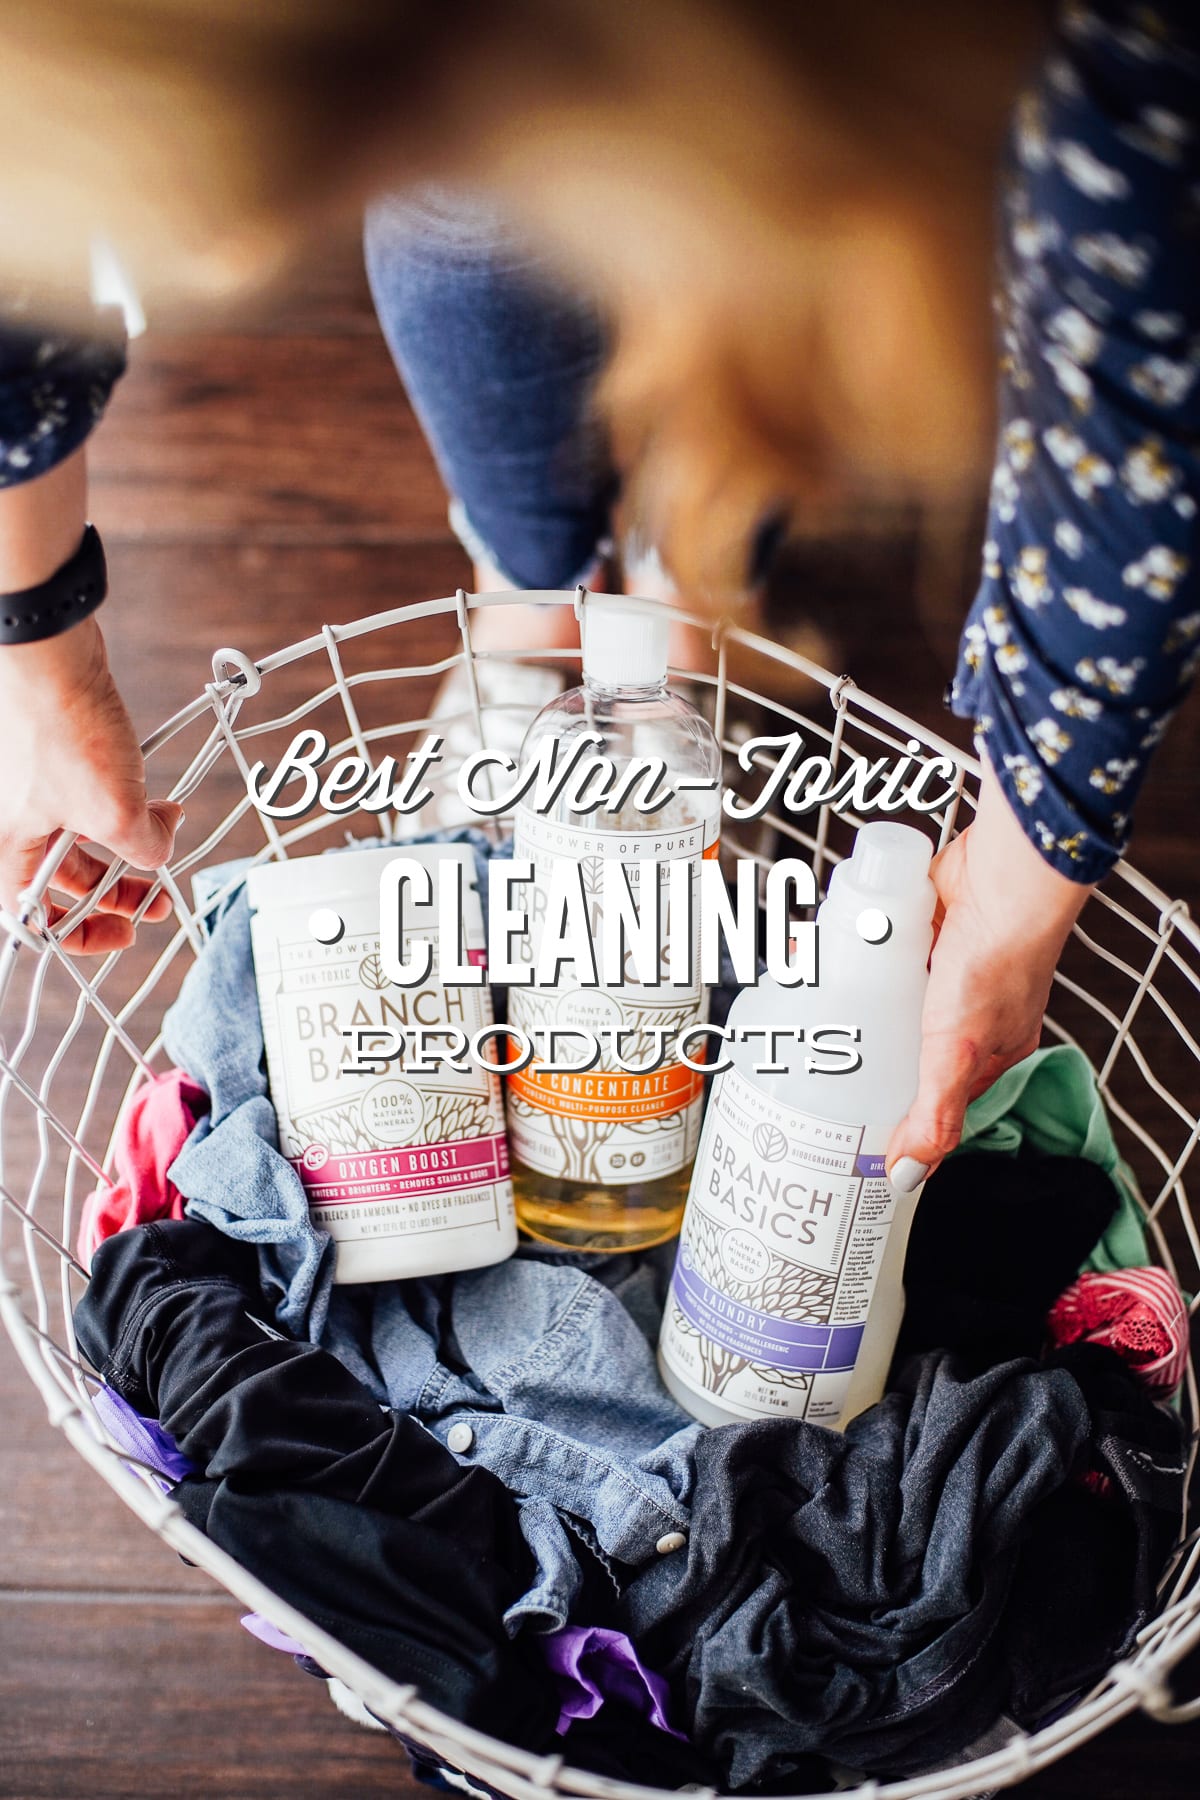 Best Non-Toxic Cleaning Brands and Products